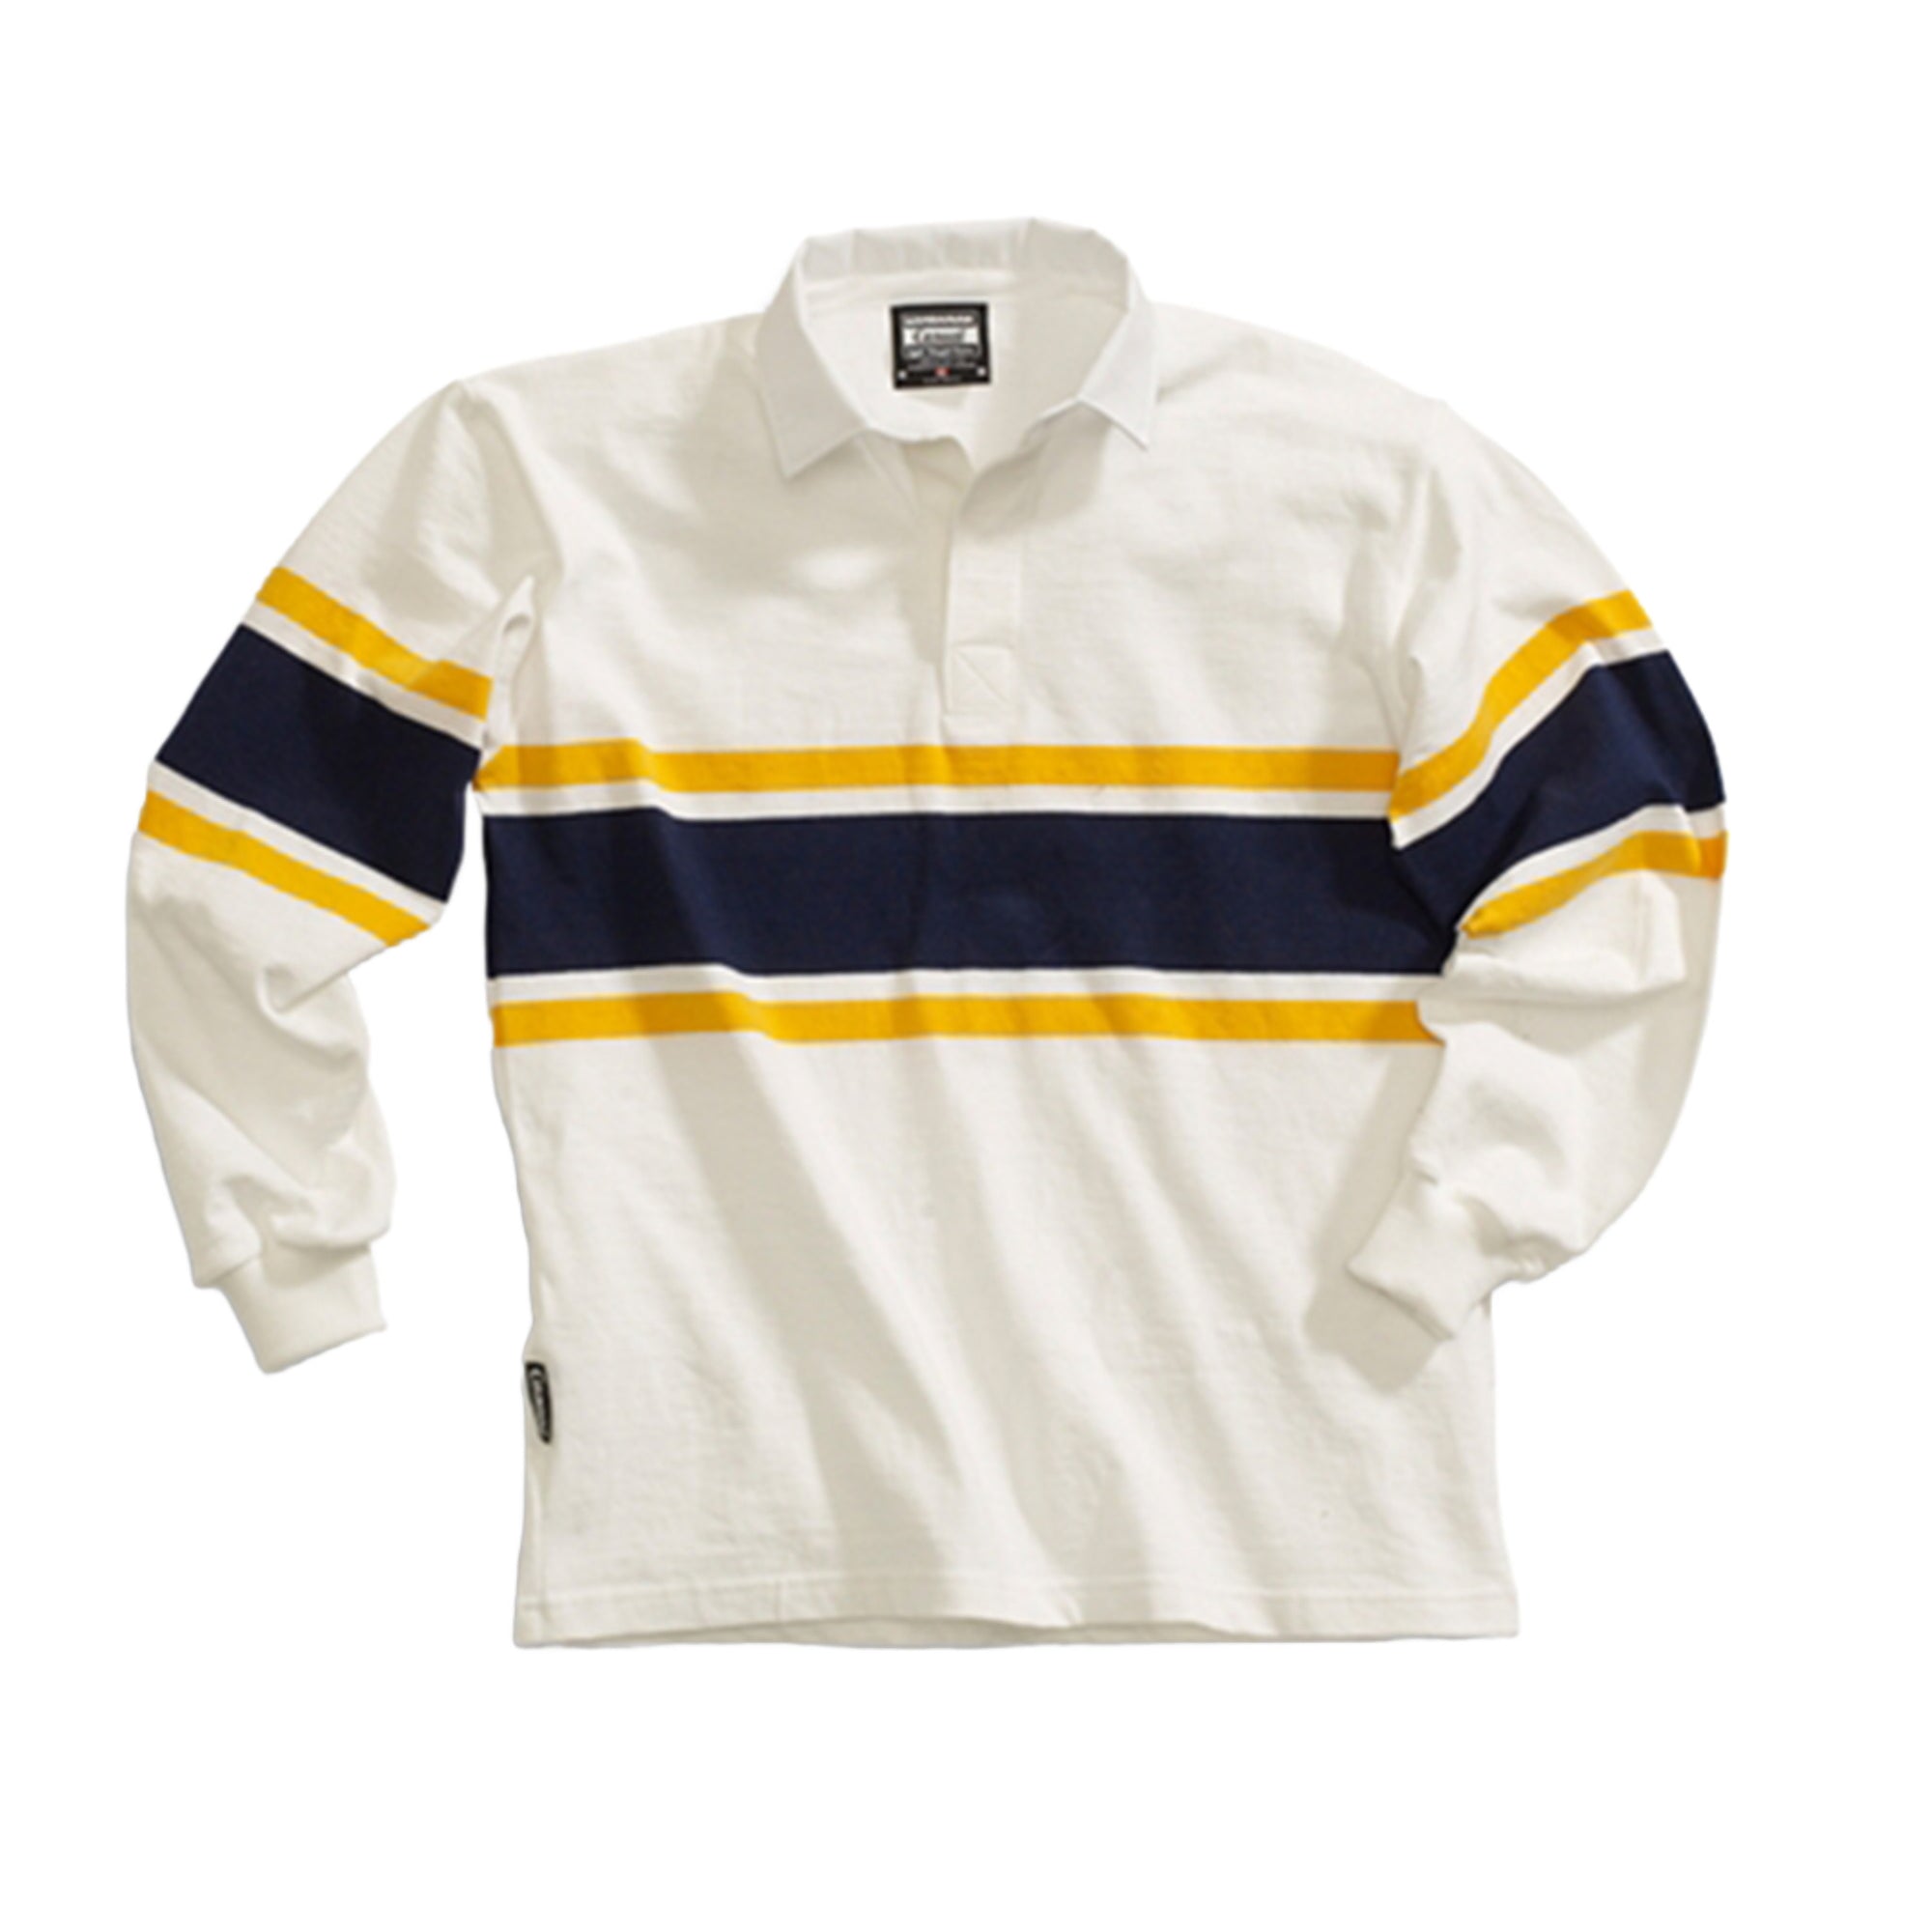 Long Sleeve Cotton Jersey white with yellow and blue strips in the middle. 